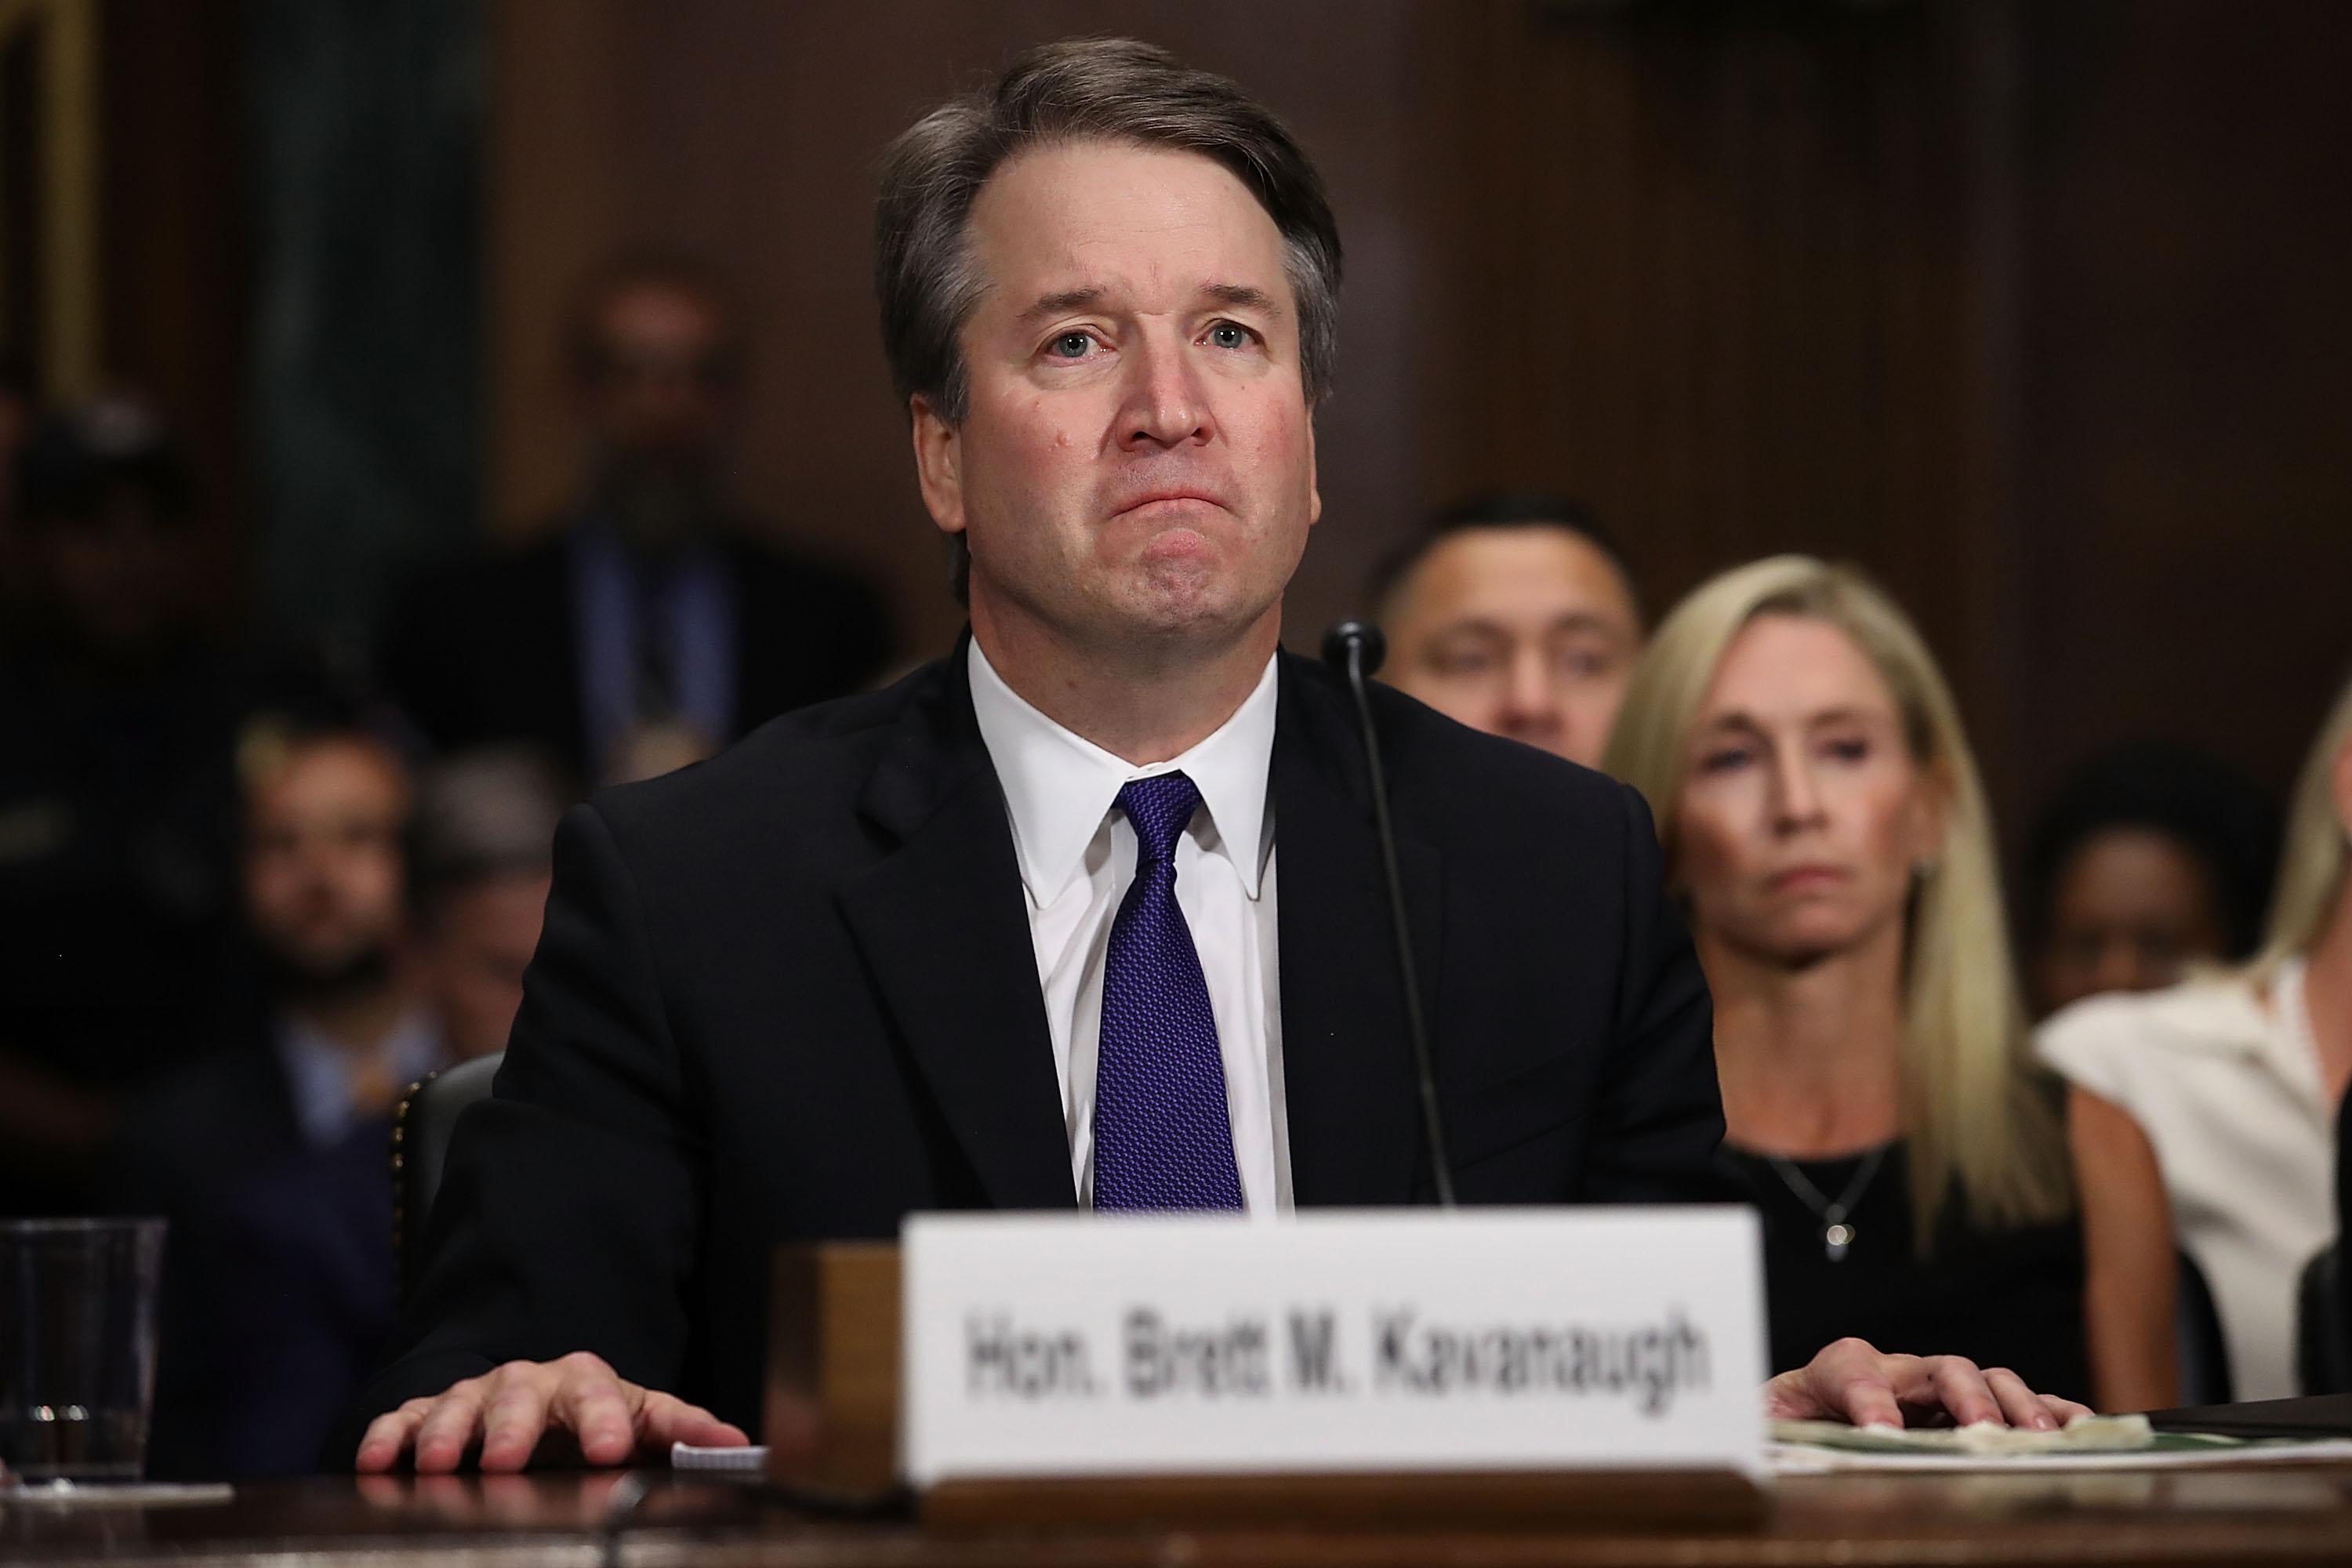 Kavanaugh, wearing a suit and seating at a table in front of an audience for the hearing, looks unhappy.